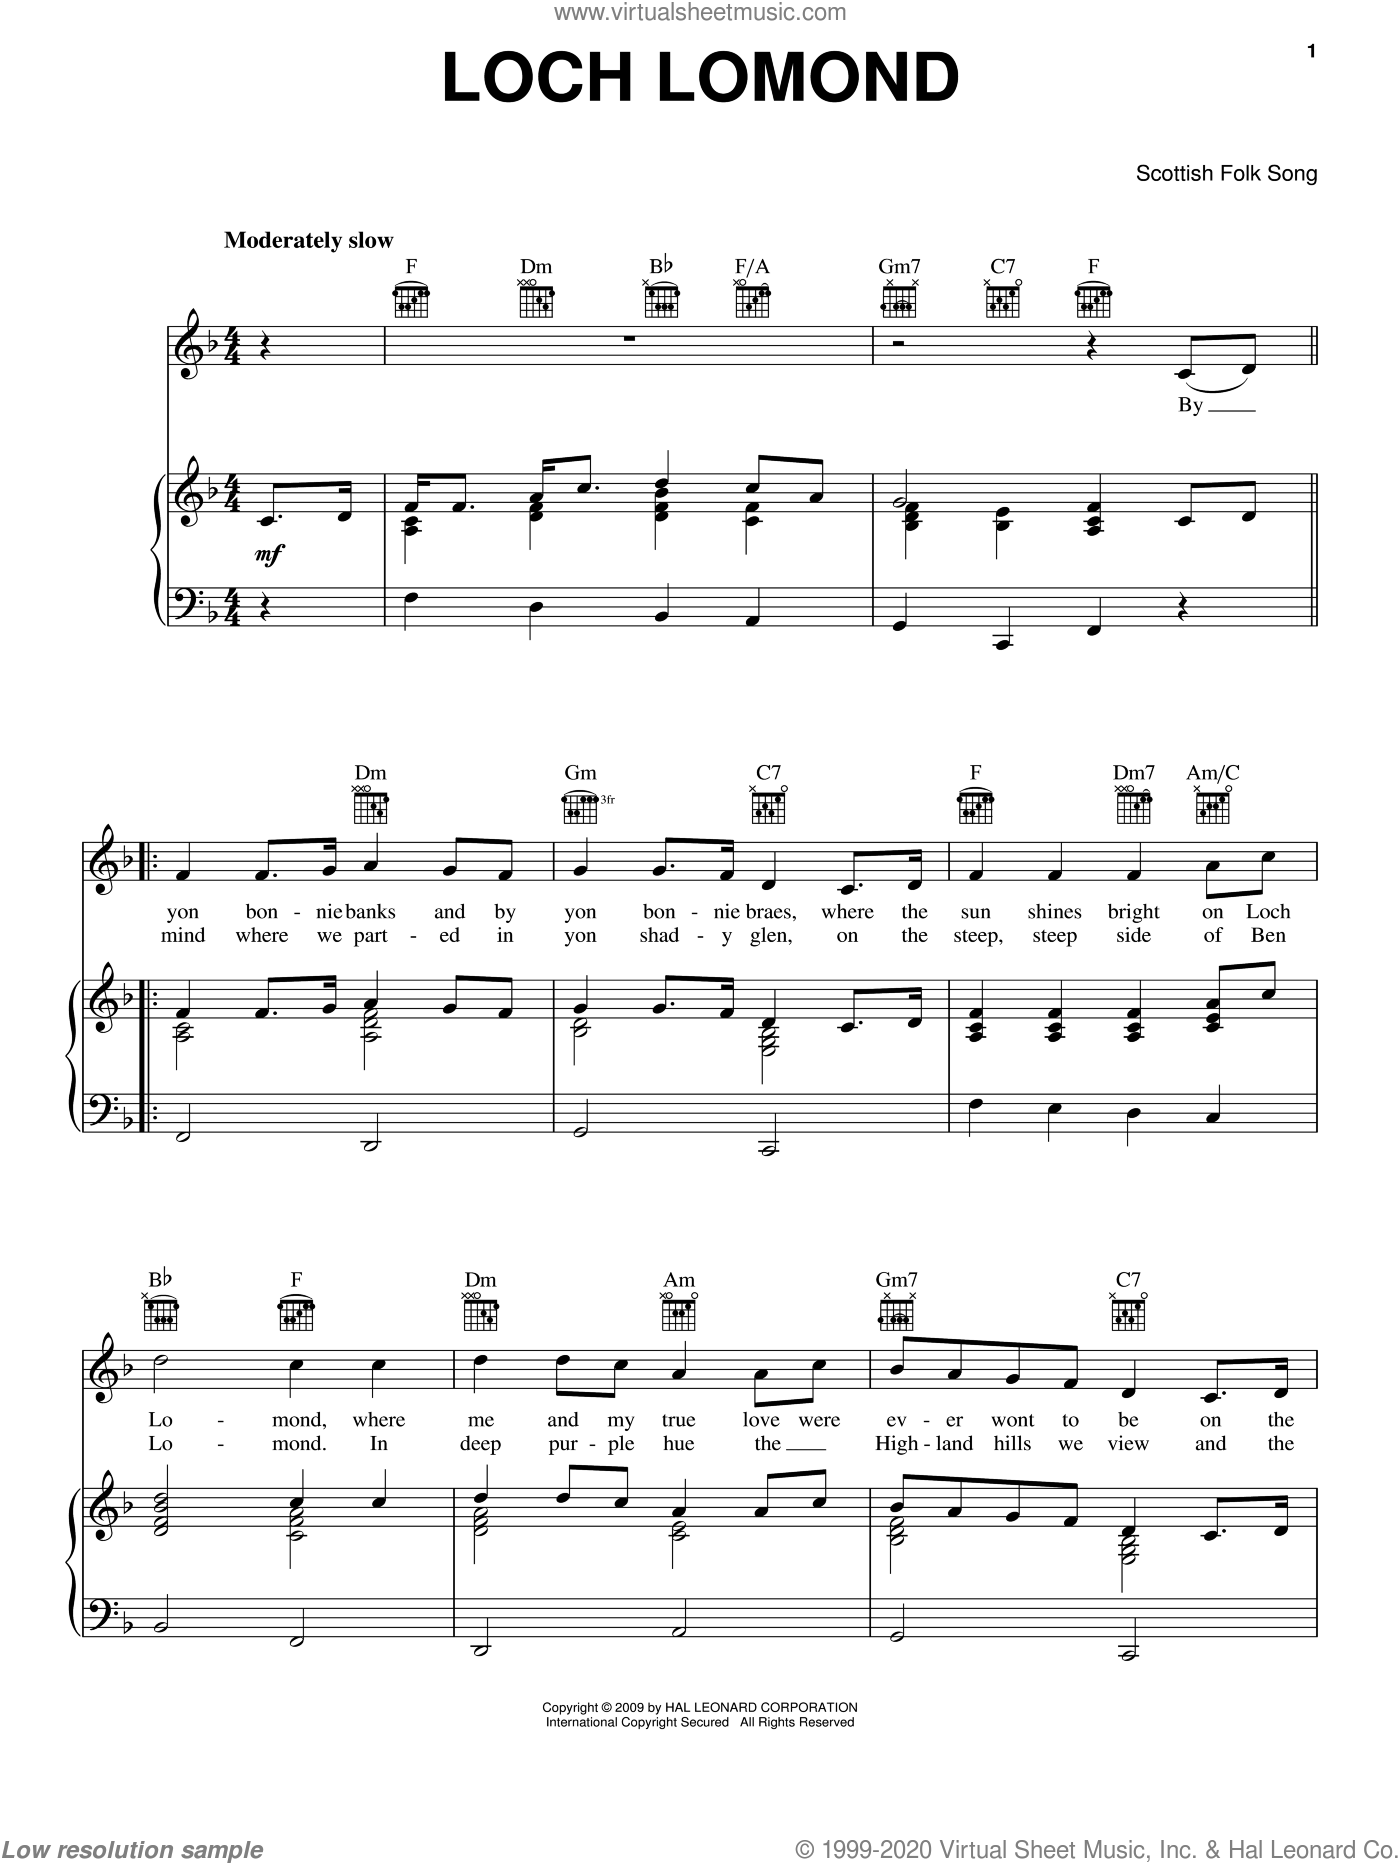 Loch Lomond sheet music for voice, piano or guitar (PDF)